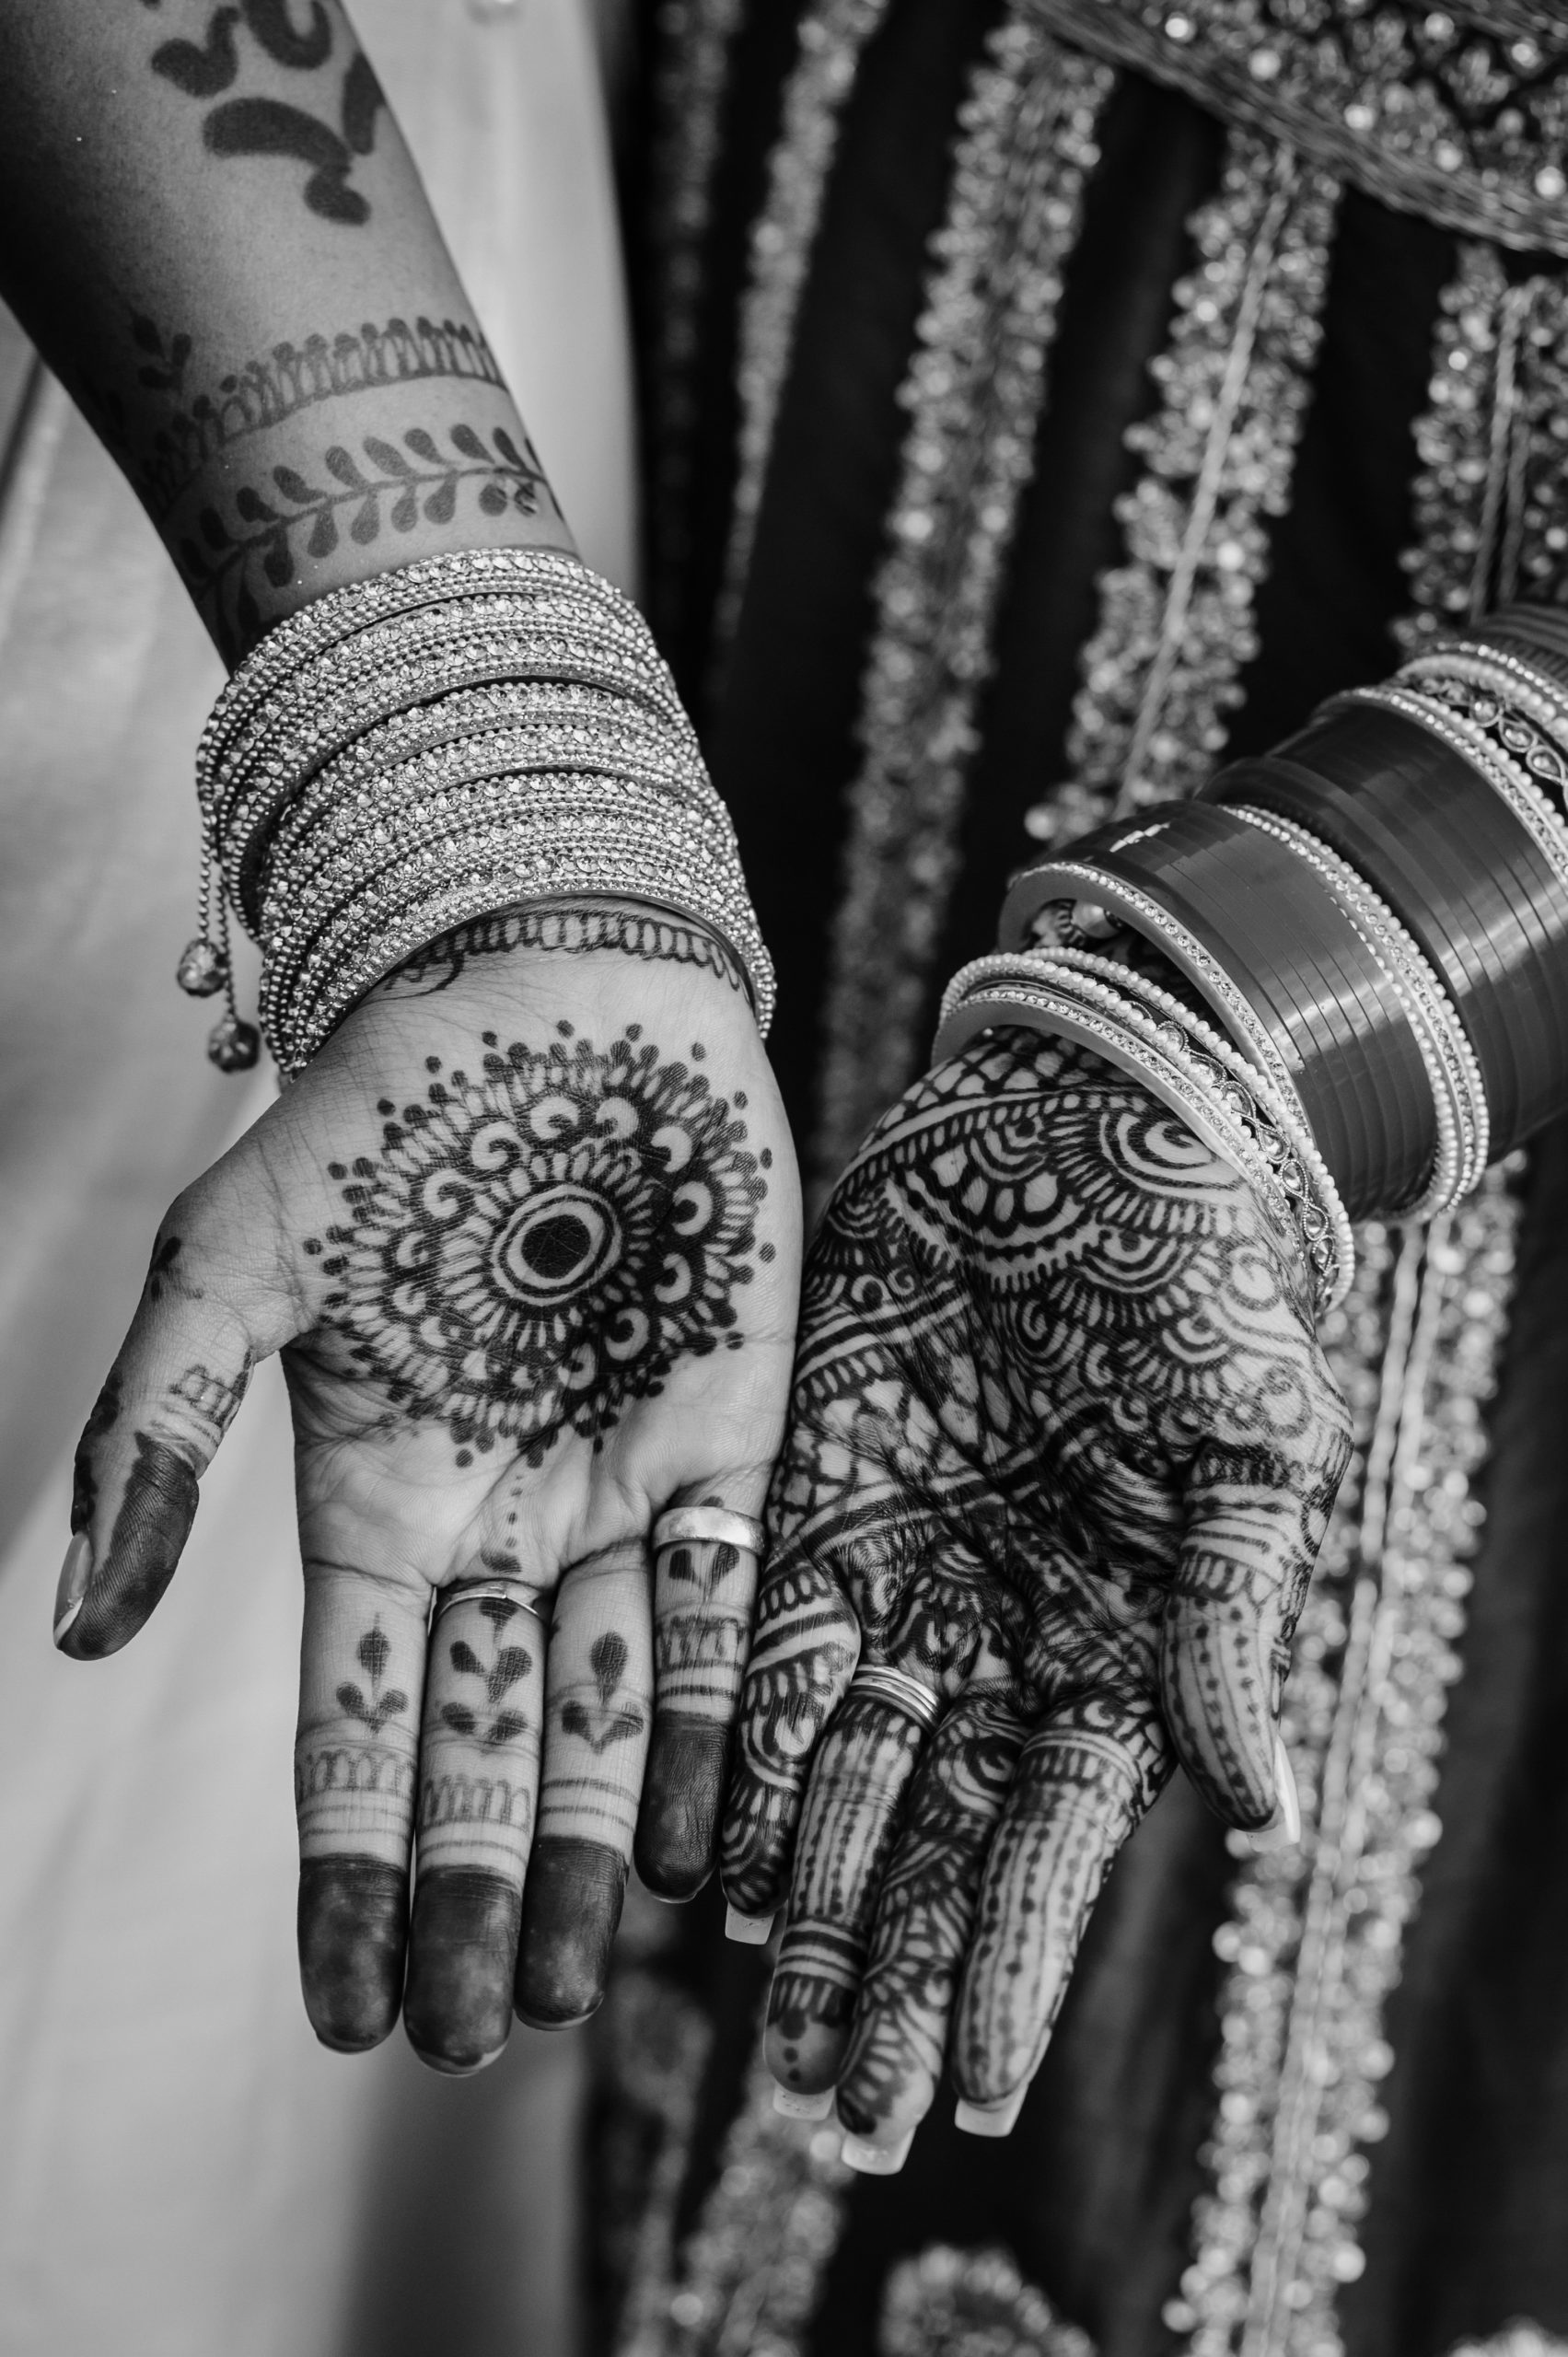 A black-and-white photo of traditional wedding henna on the hands of the celebrants.